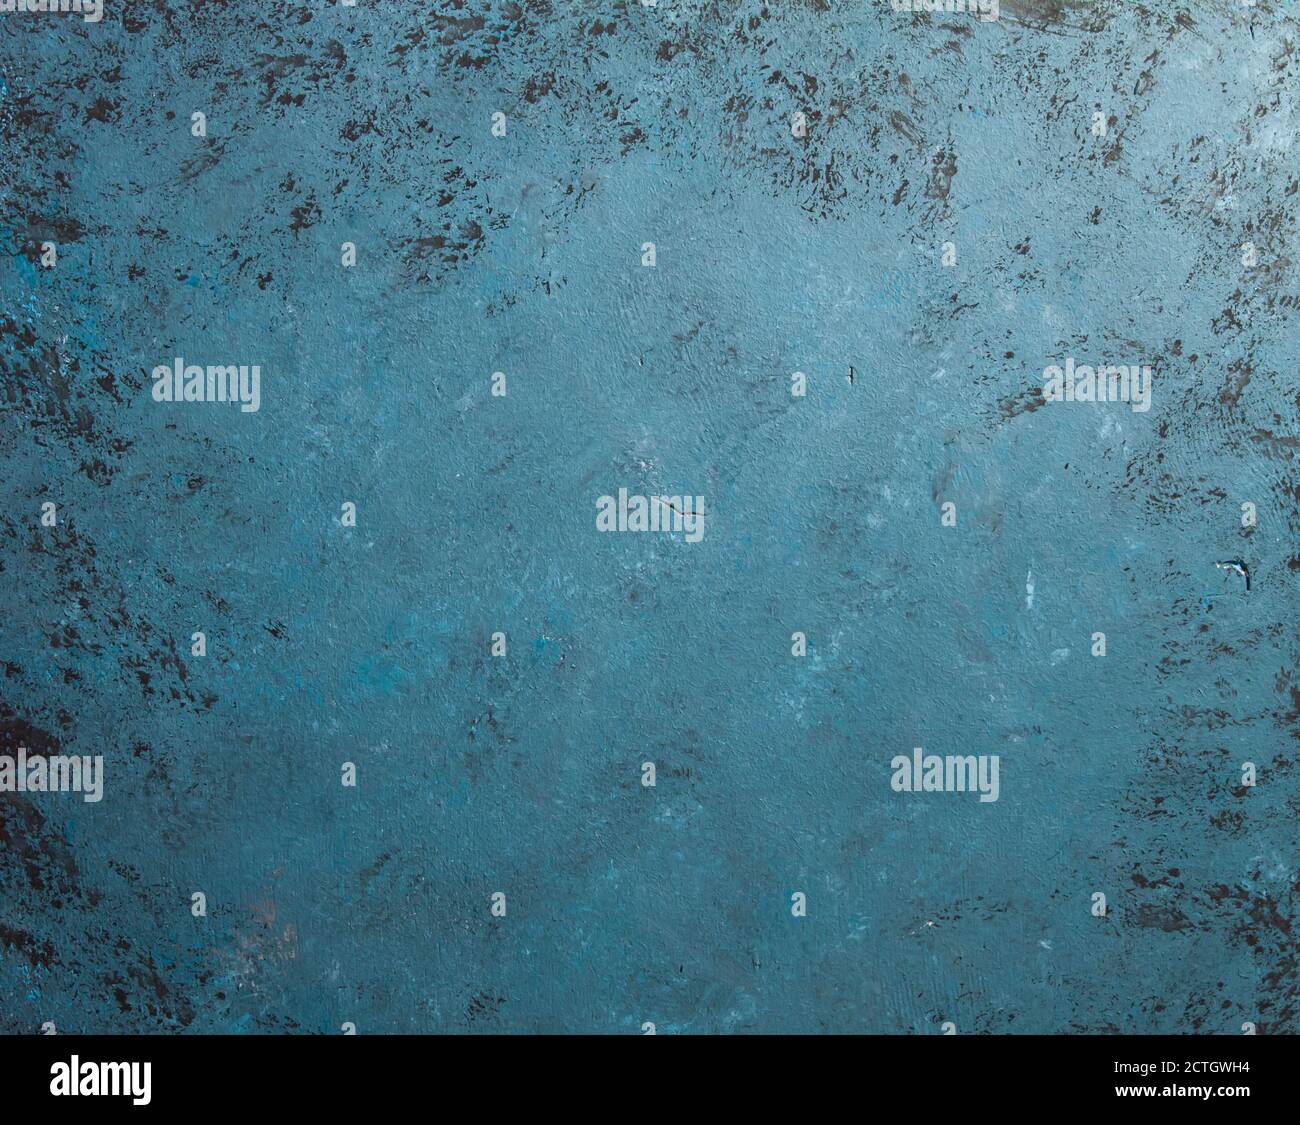 Concrete blue gray background with old absolete scuffs, black splashes. Grungy paint Textured floor, wall cement texture, grunge style. Space for text Stock Photo